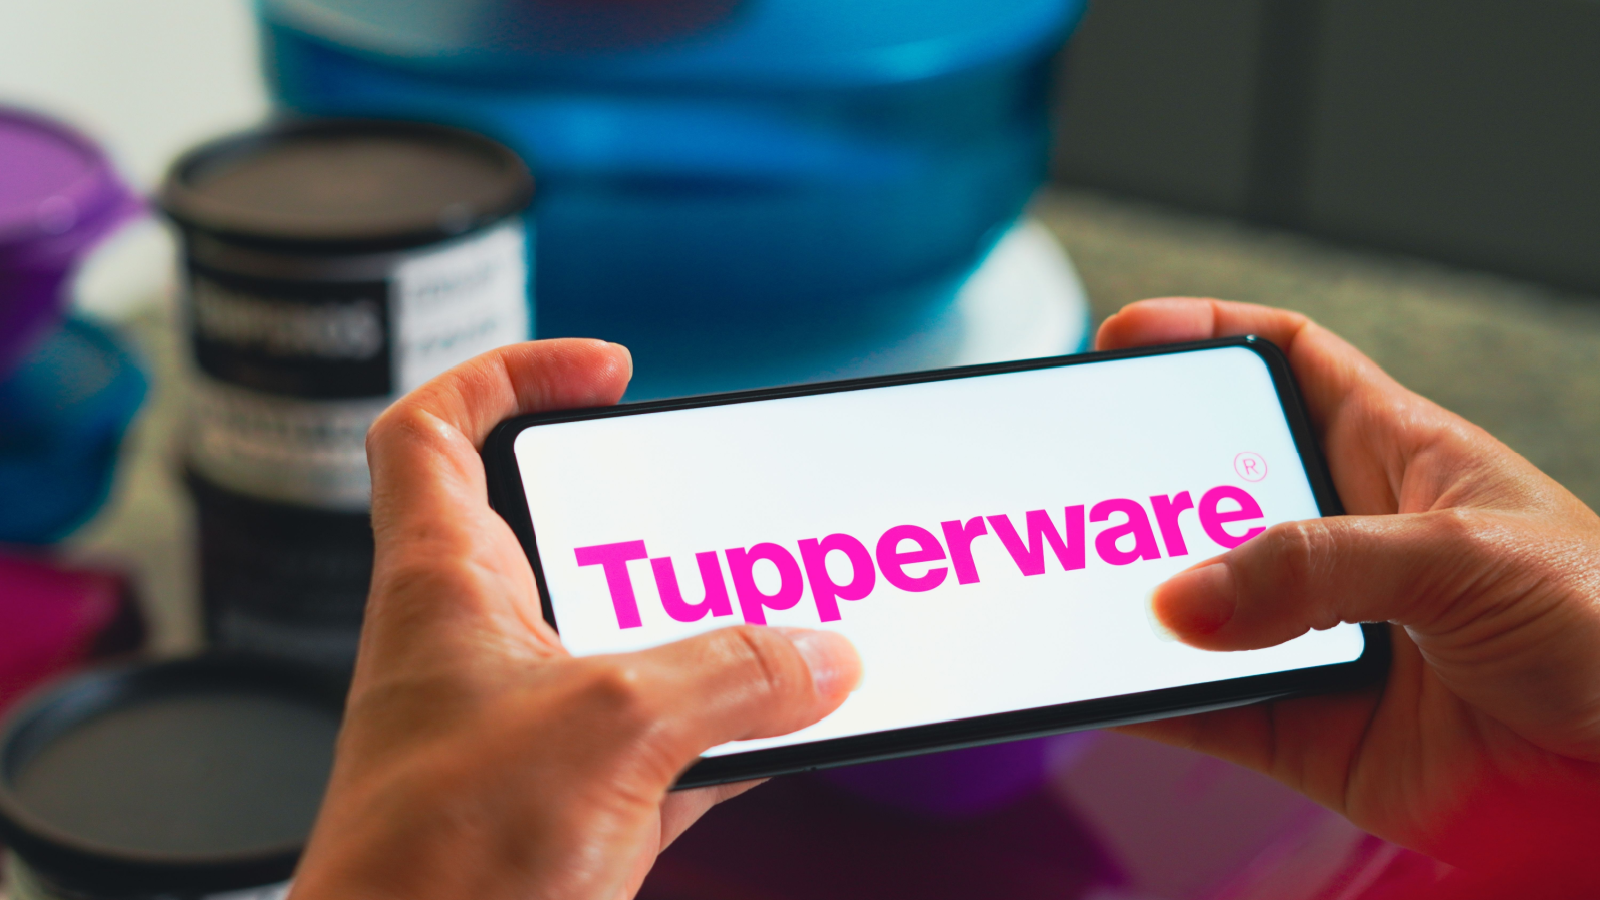 In this photo illustration, the Tupperware (TUP) logo is displayed on a smartphone screen and in the background various plastic products (canisters).